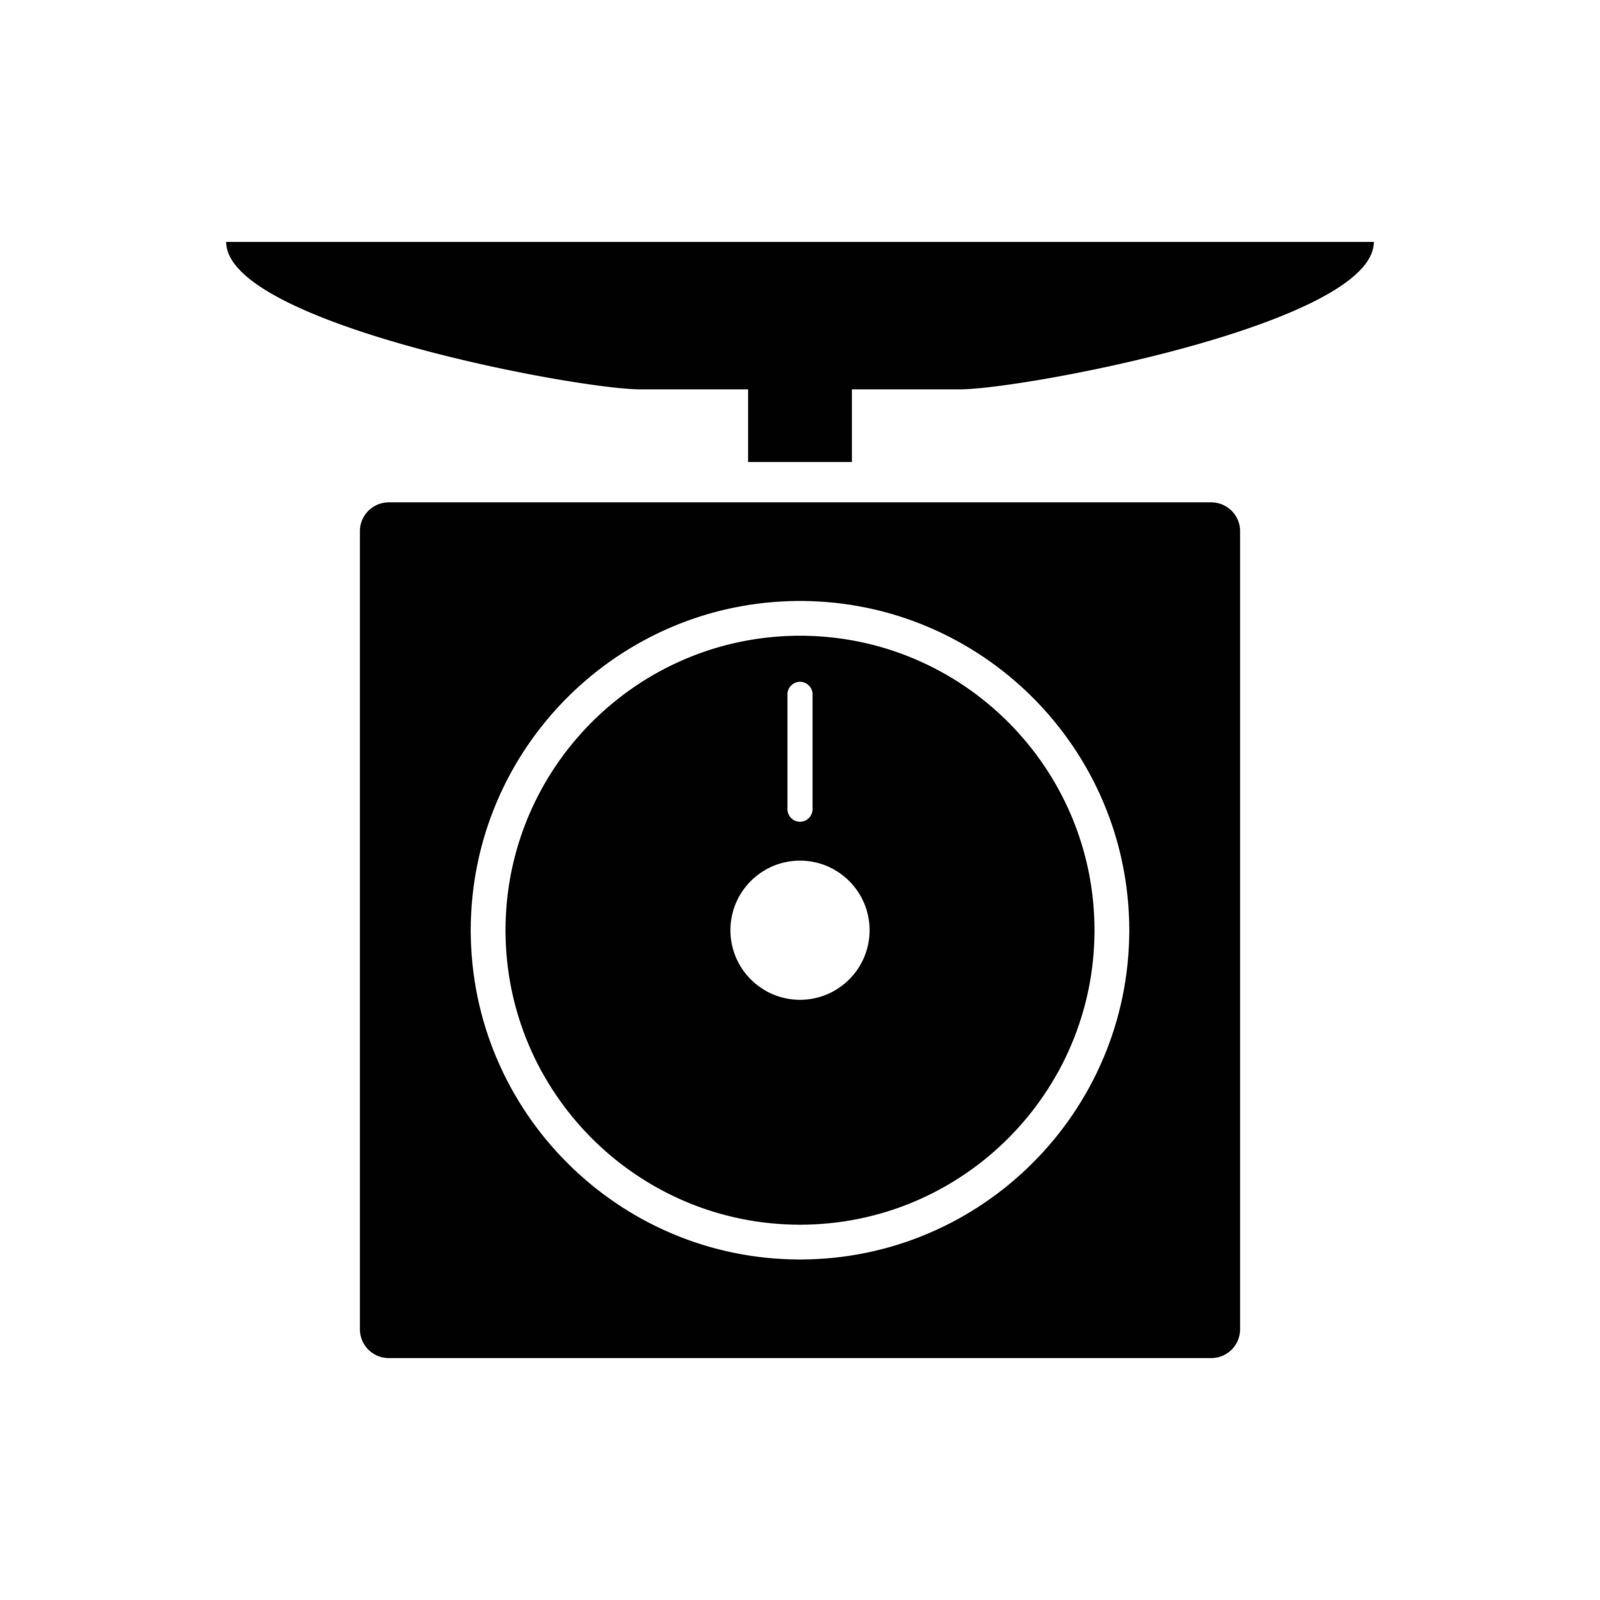 Kitchen scale silhouette icon. Weighing. Kitchen tool. Editable vector.